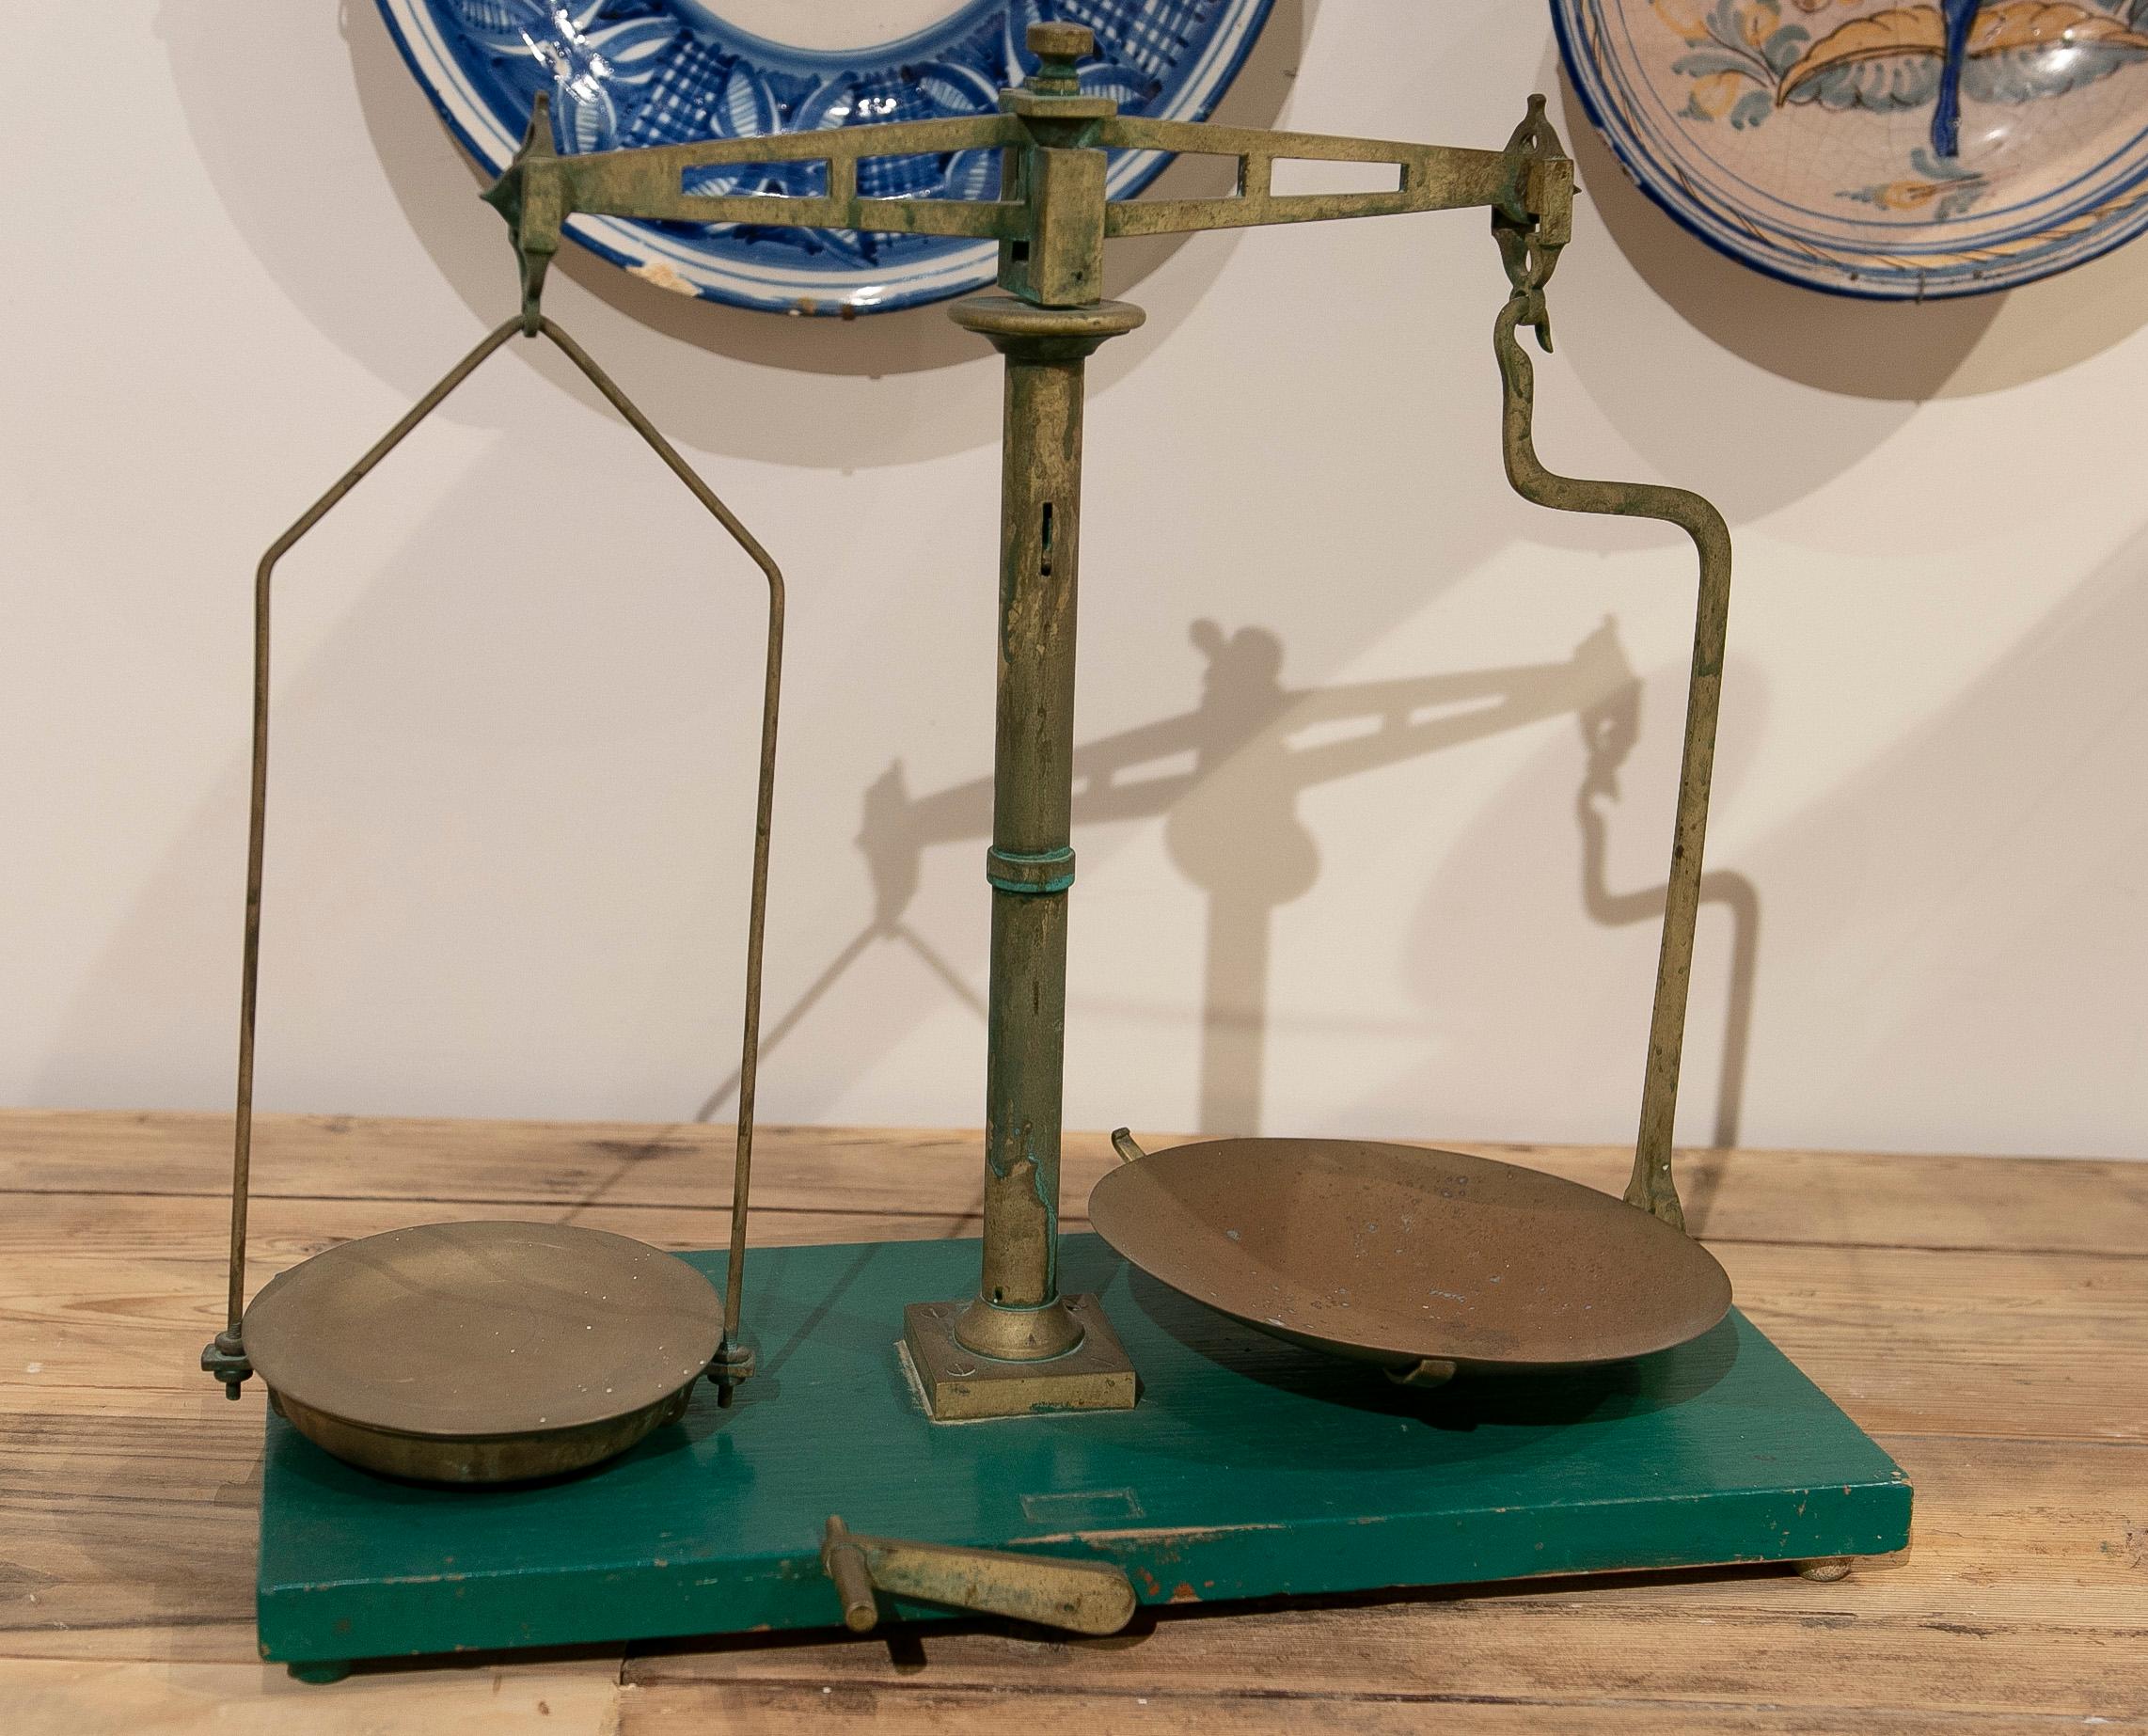 Spanish bronze balance scale with green painted wooden stand.